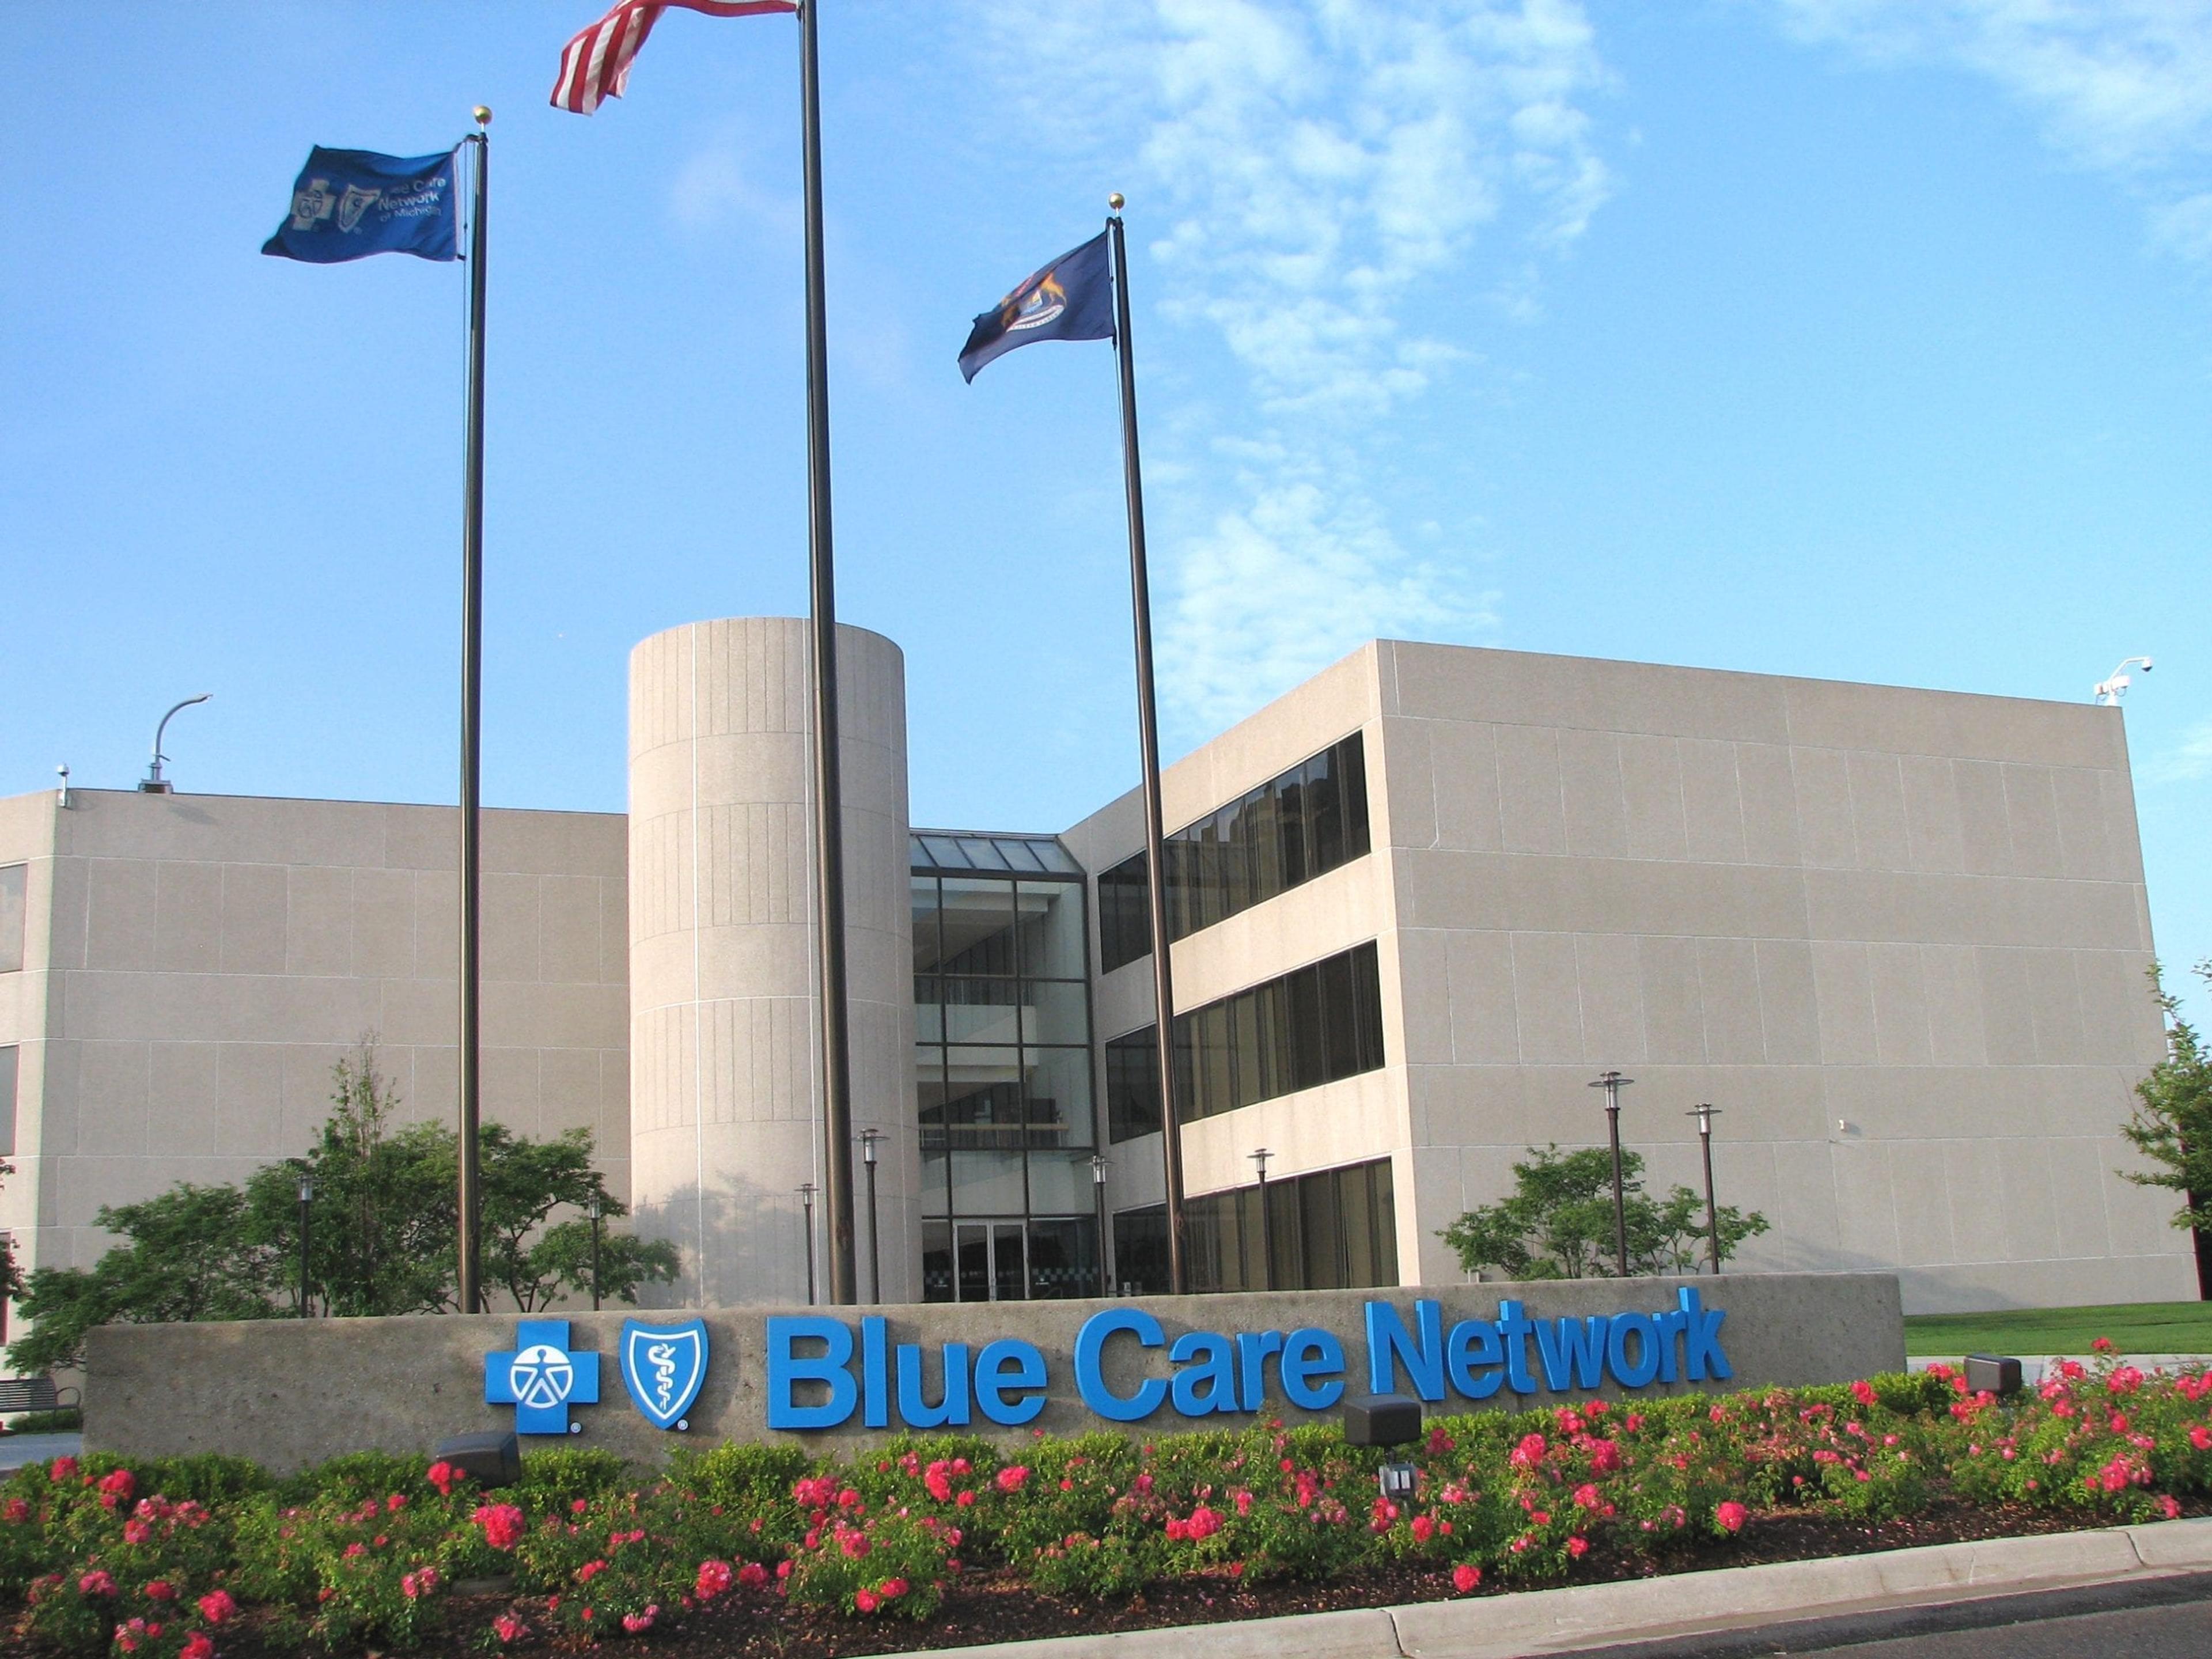 Blue Care Network Commons building